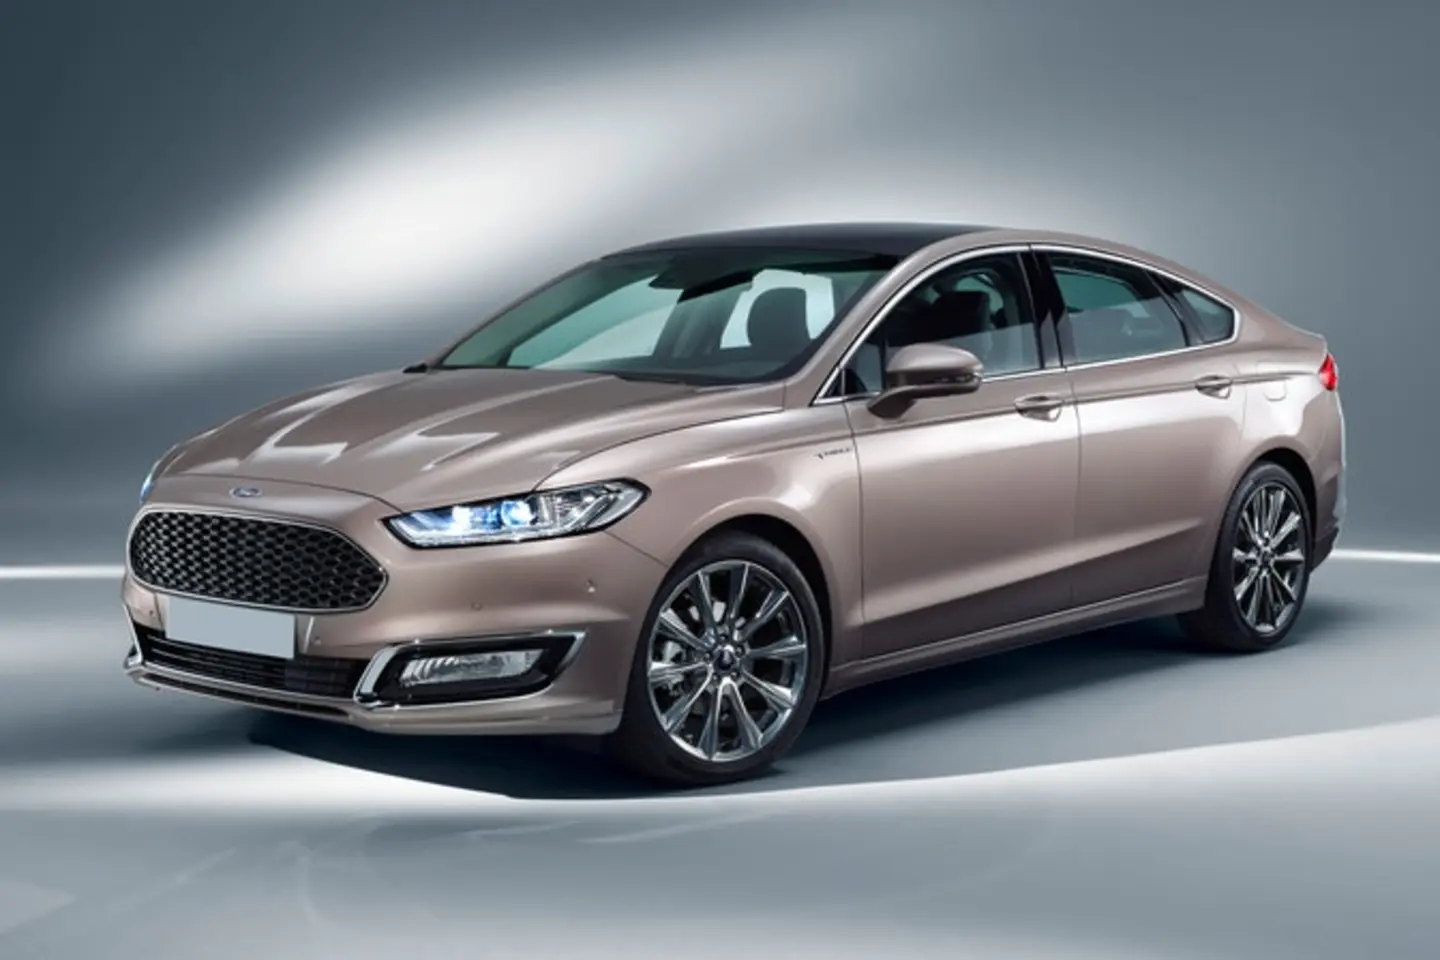 The exterior of a gold Ford Mondeo